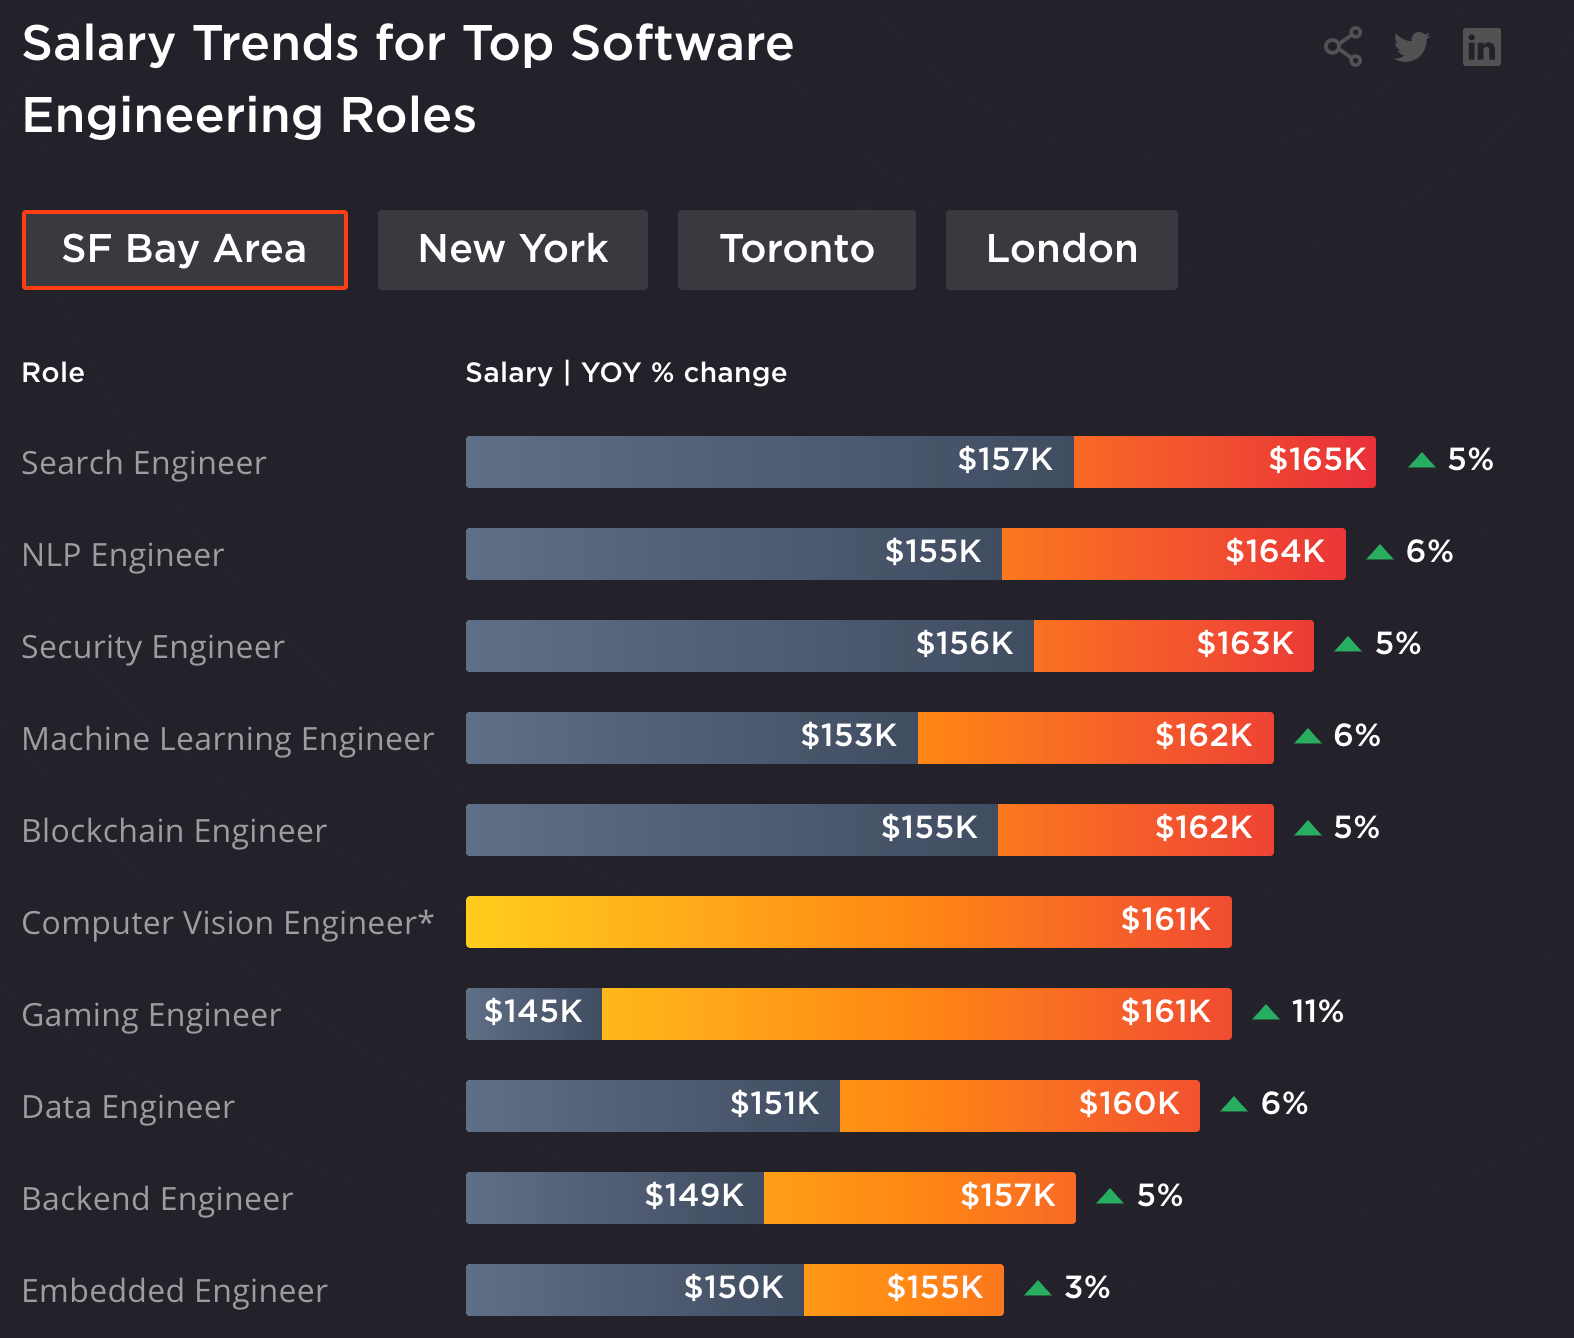 Software Engineer Salaries by Role